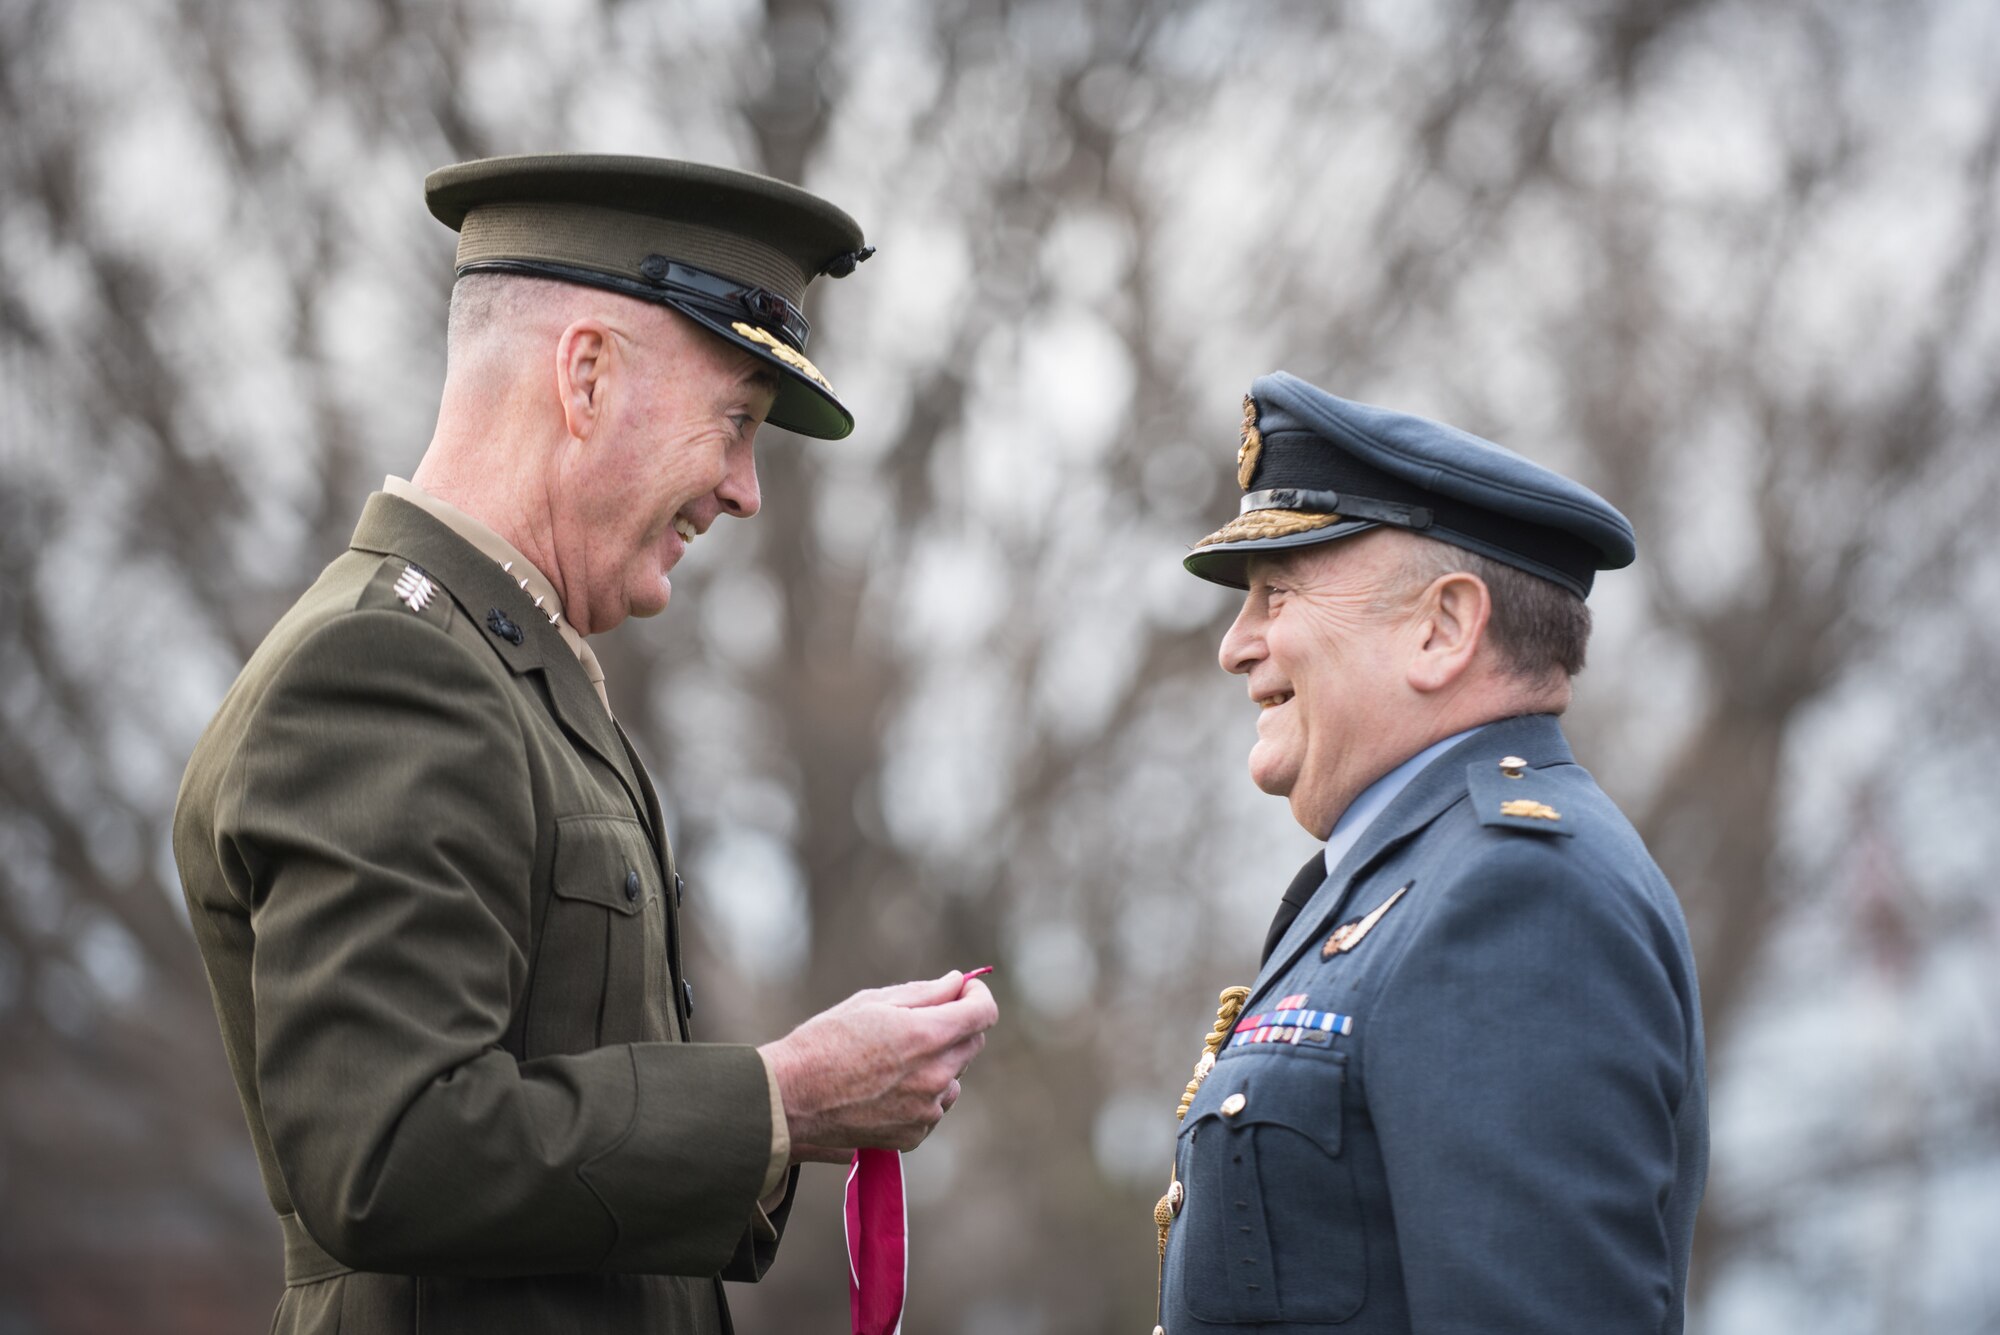 U.S. Marine Corps Gen. Joseph F. Dunford, Jr., chairman of the Joint Chiefs of Staff, prepares to award Air Chief Marshal Sir Stuart Peach, United Kingdom Chief of Defense, the Legion of Merit during an Armed Forces Full Honor Arrival Ceremony at Joint Base Myer-Henderson Hall, April 6, 2018. The award was presented for his efforts to bolster key military support for the Defeat-ISIS Coalition contributing to the significant degradation of ISIS in Iraq and Syria. This is Air Chief Marshal Peach's last visit before he transitions into a new role as the Chairman of the NATO Military Committee. (DoD Photo by U.S. Army Sgt. James K. McCann)